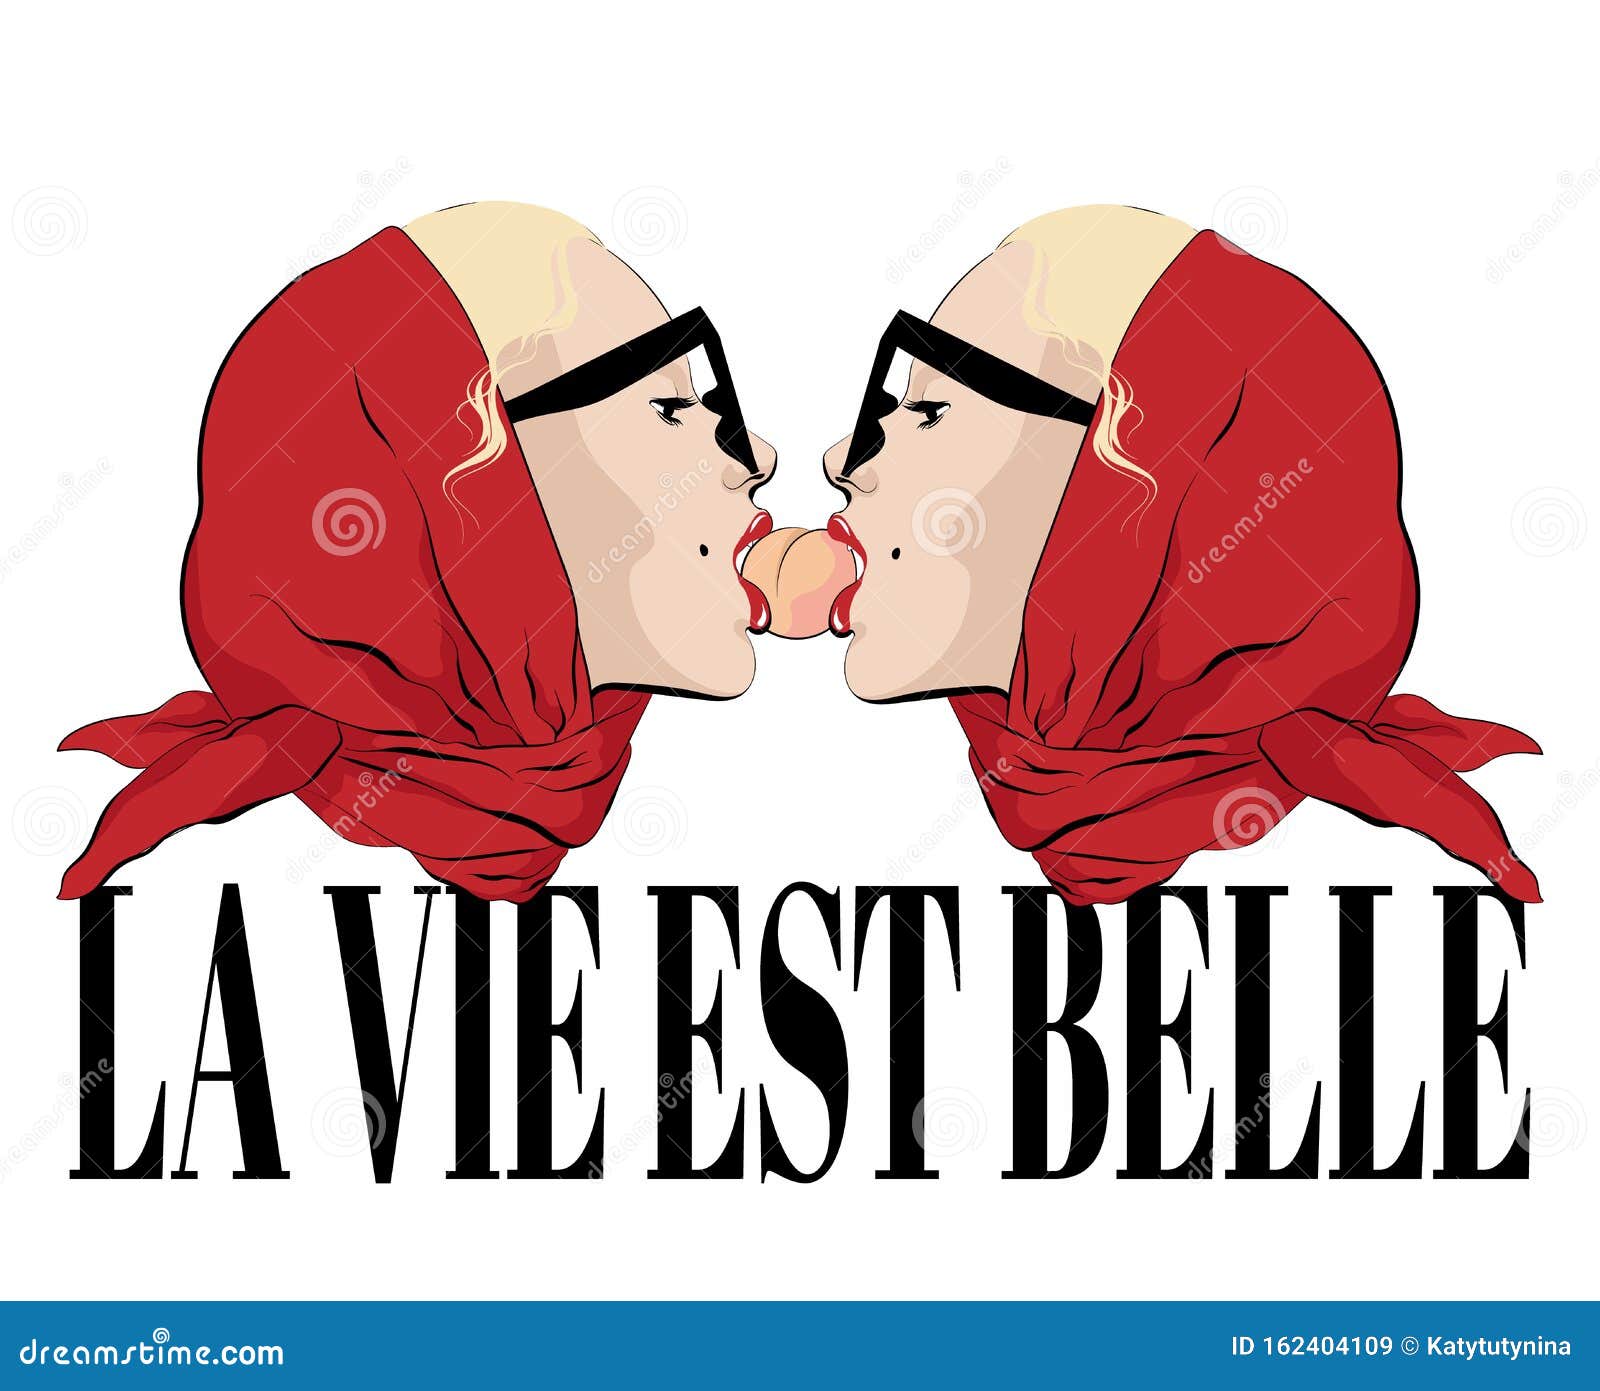 la vie est belle.  hand drawn  of blondes  in shawl and glasses biting a peach.